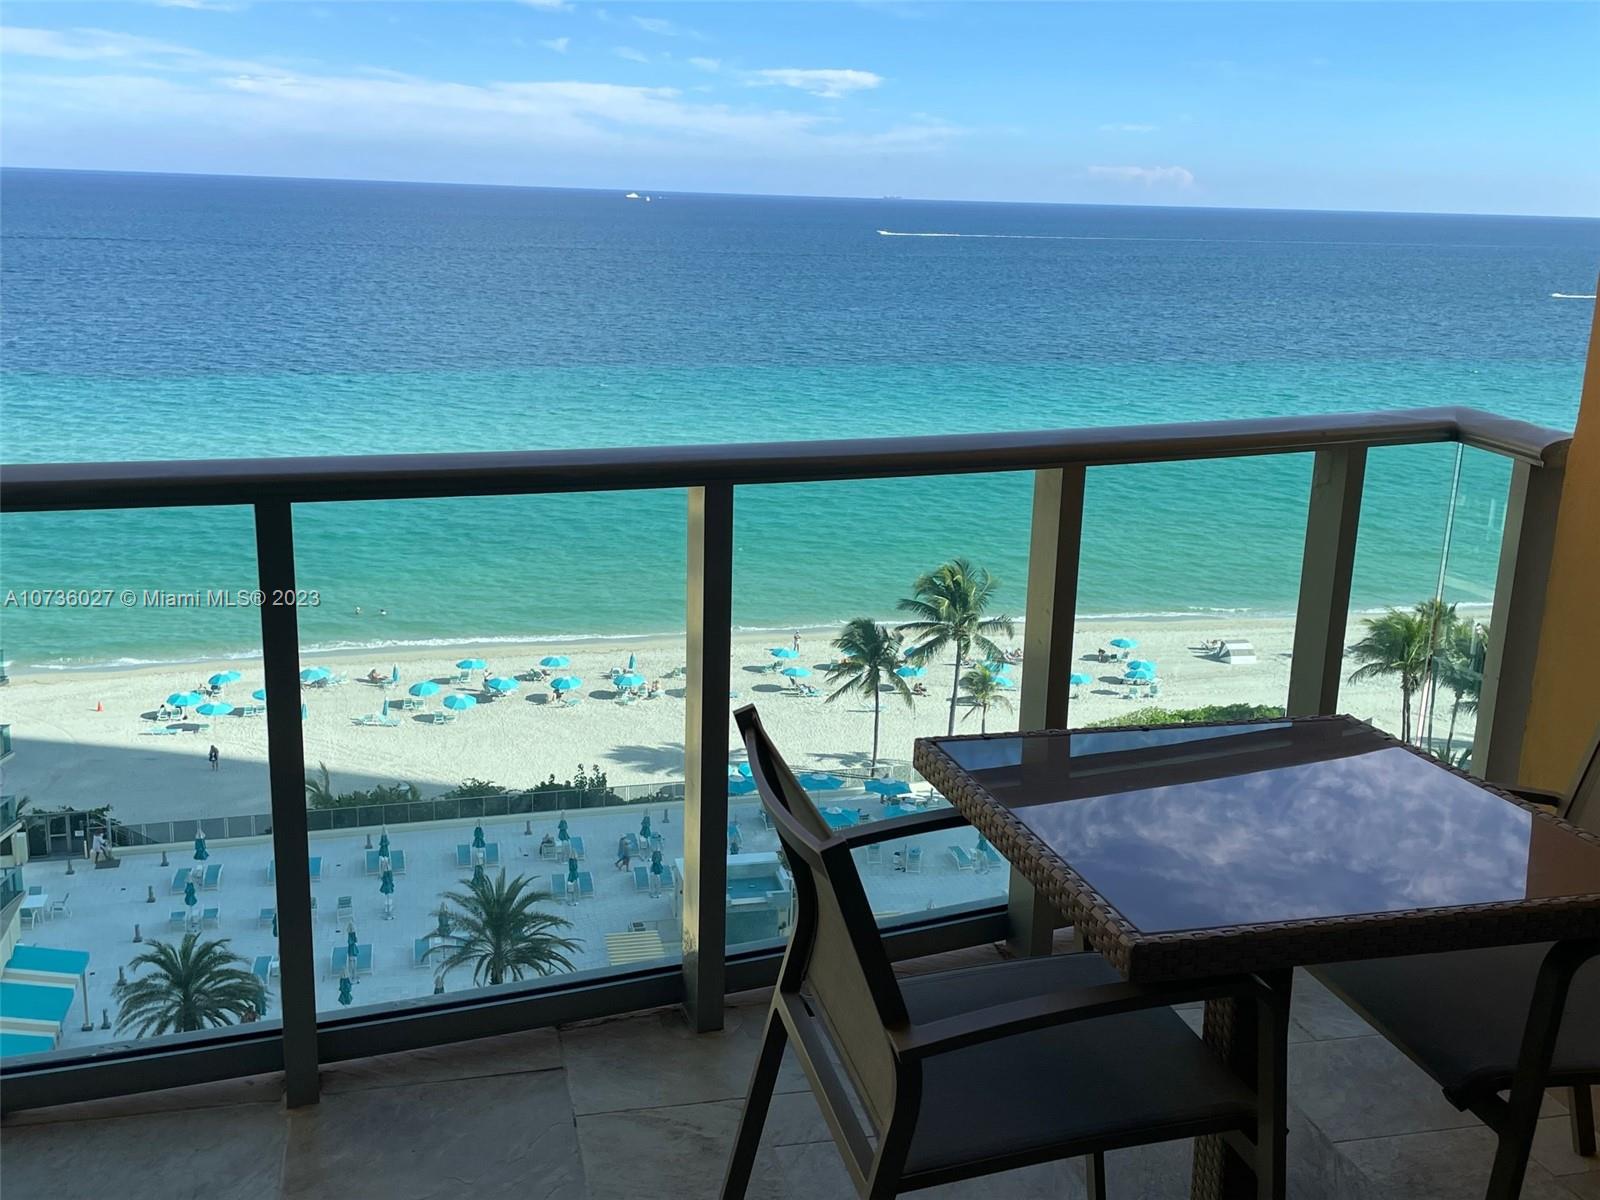 2501 S OCEAN DR #1221 (Available MAY 3), Hollywood FL 33019